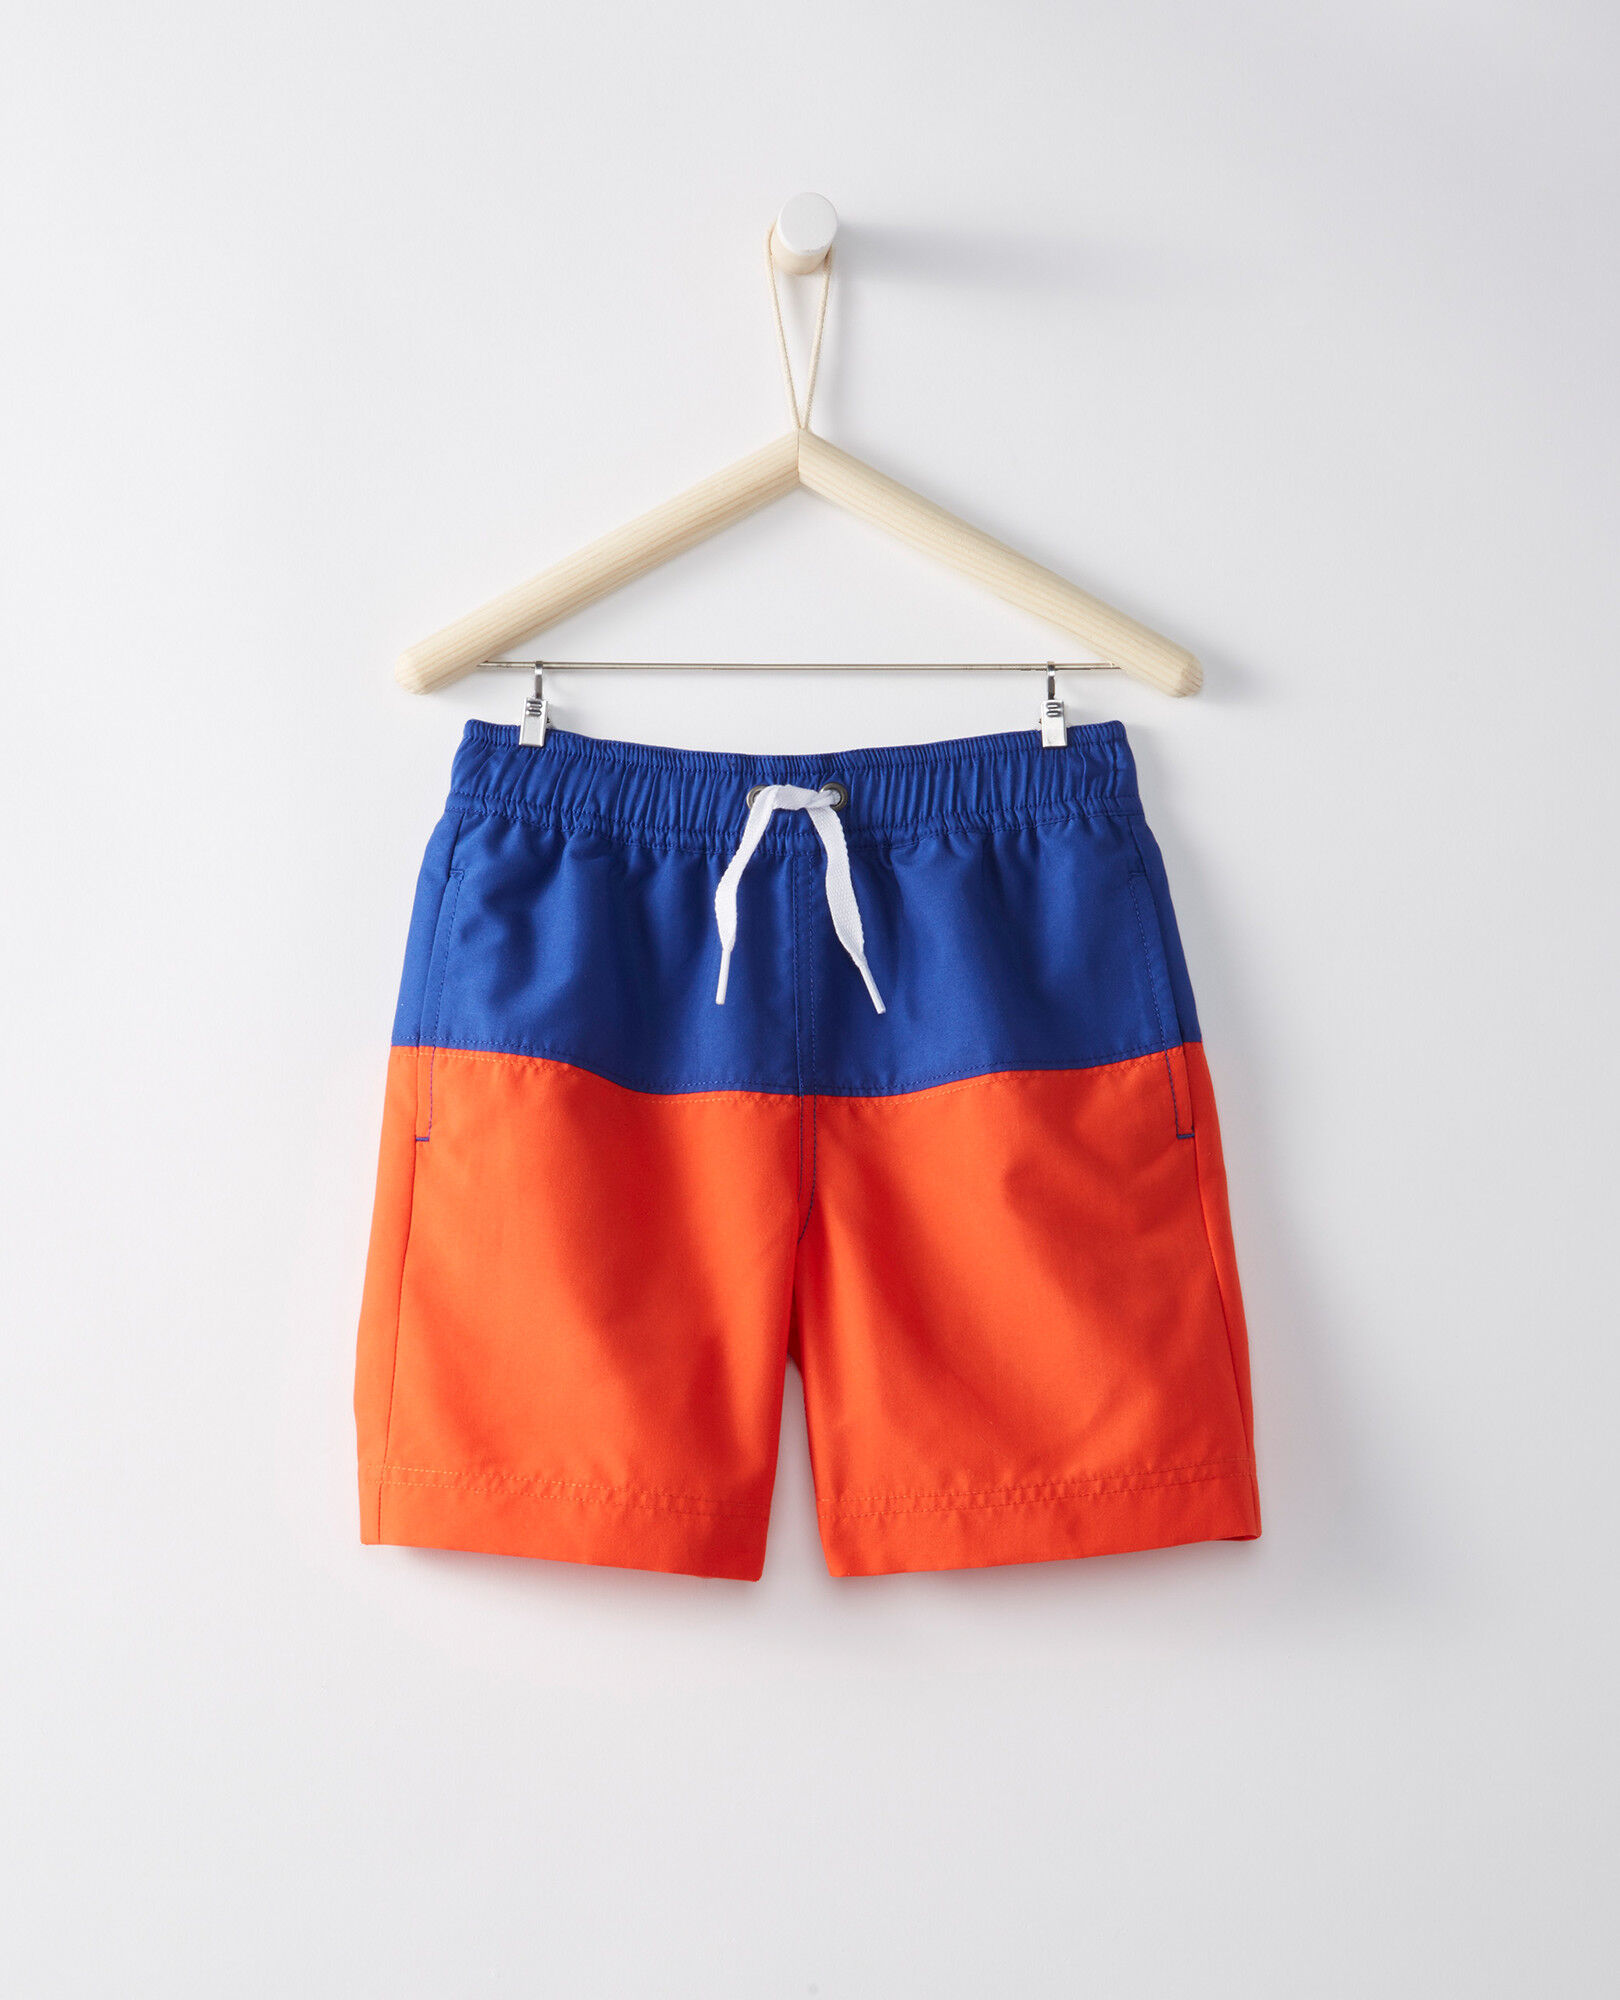 Clothing, Shoes & Accessories Swimwear Hanna Andersson 80 90 Board Shorts  Swim Trunks NEW Swimming Shorts Blue 2T 3T 3 curridabat.go.cr